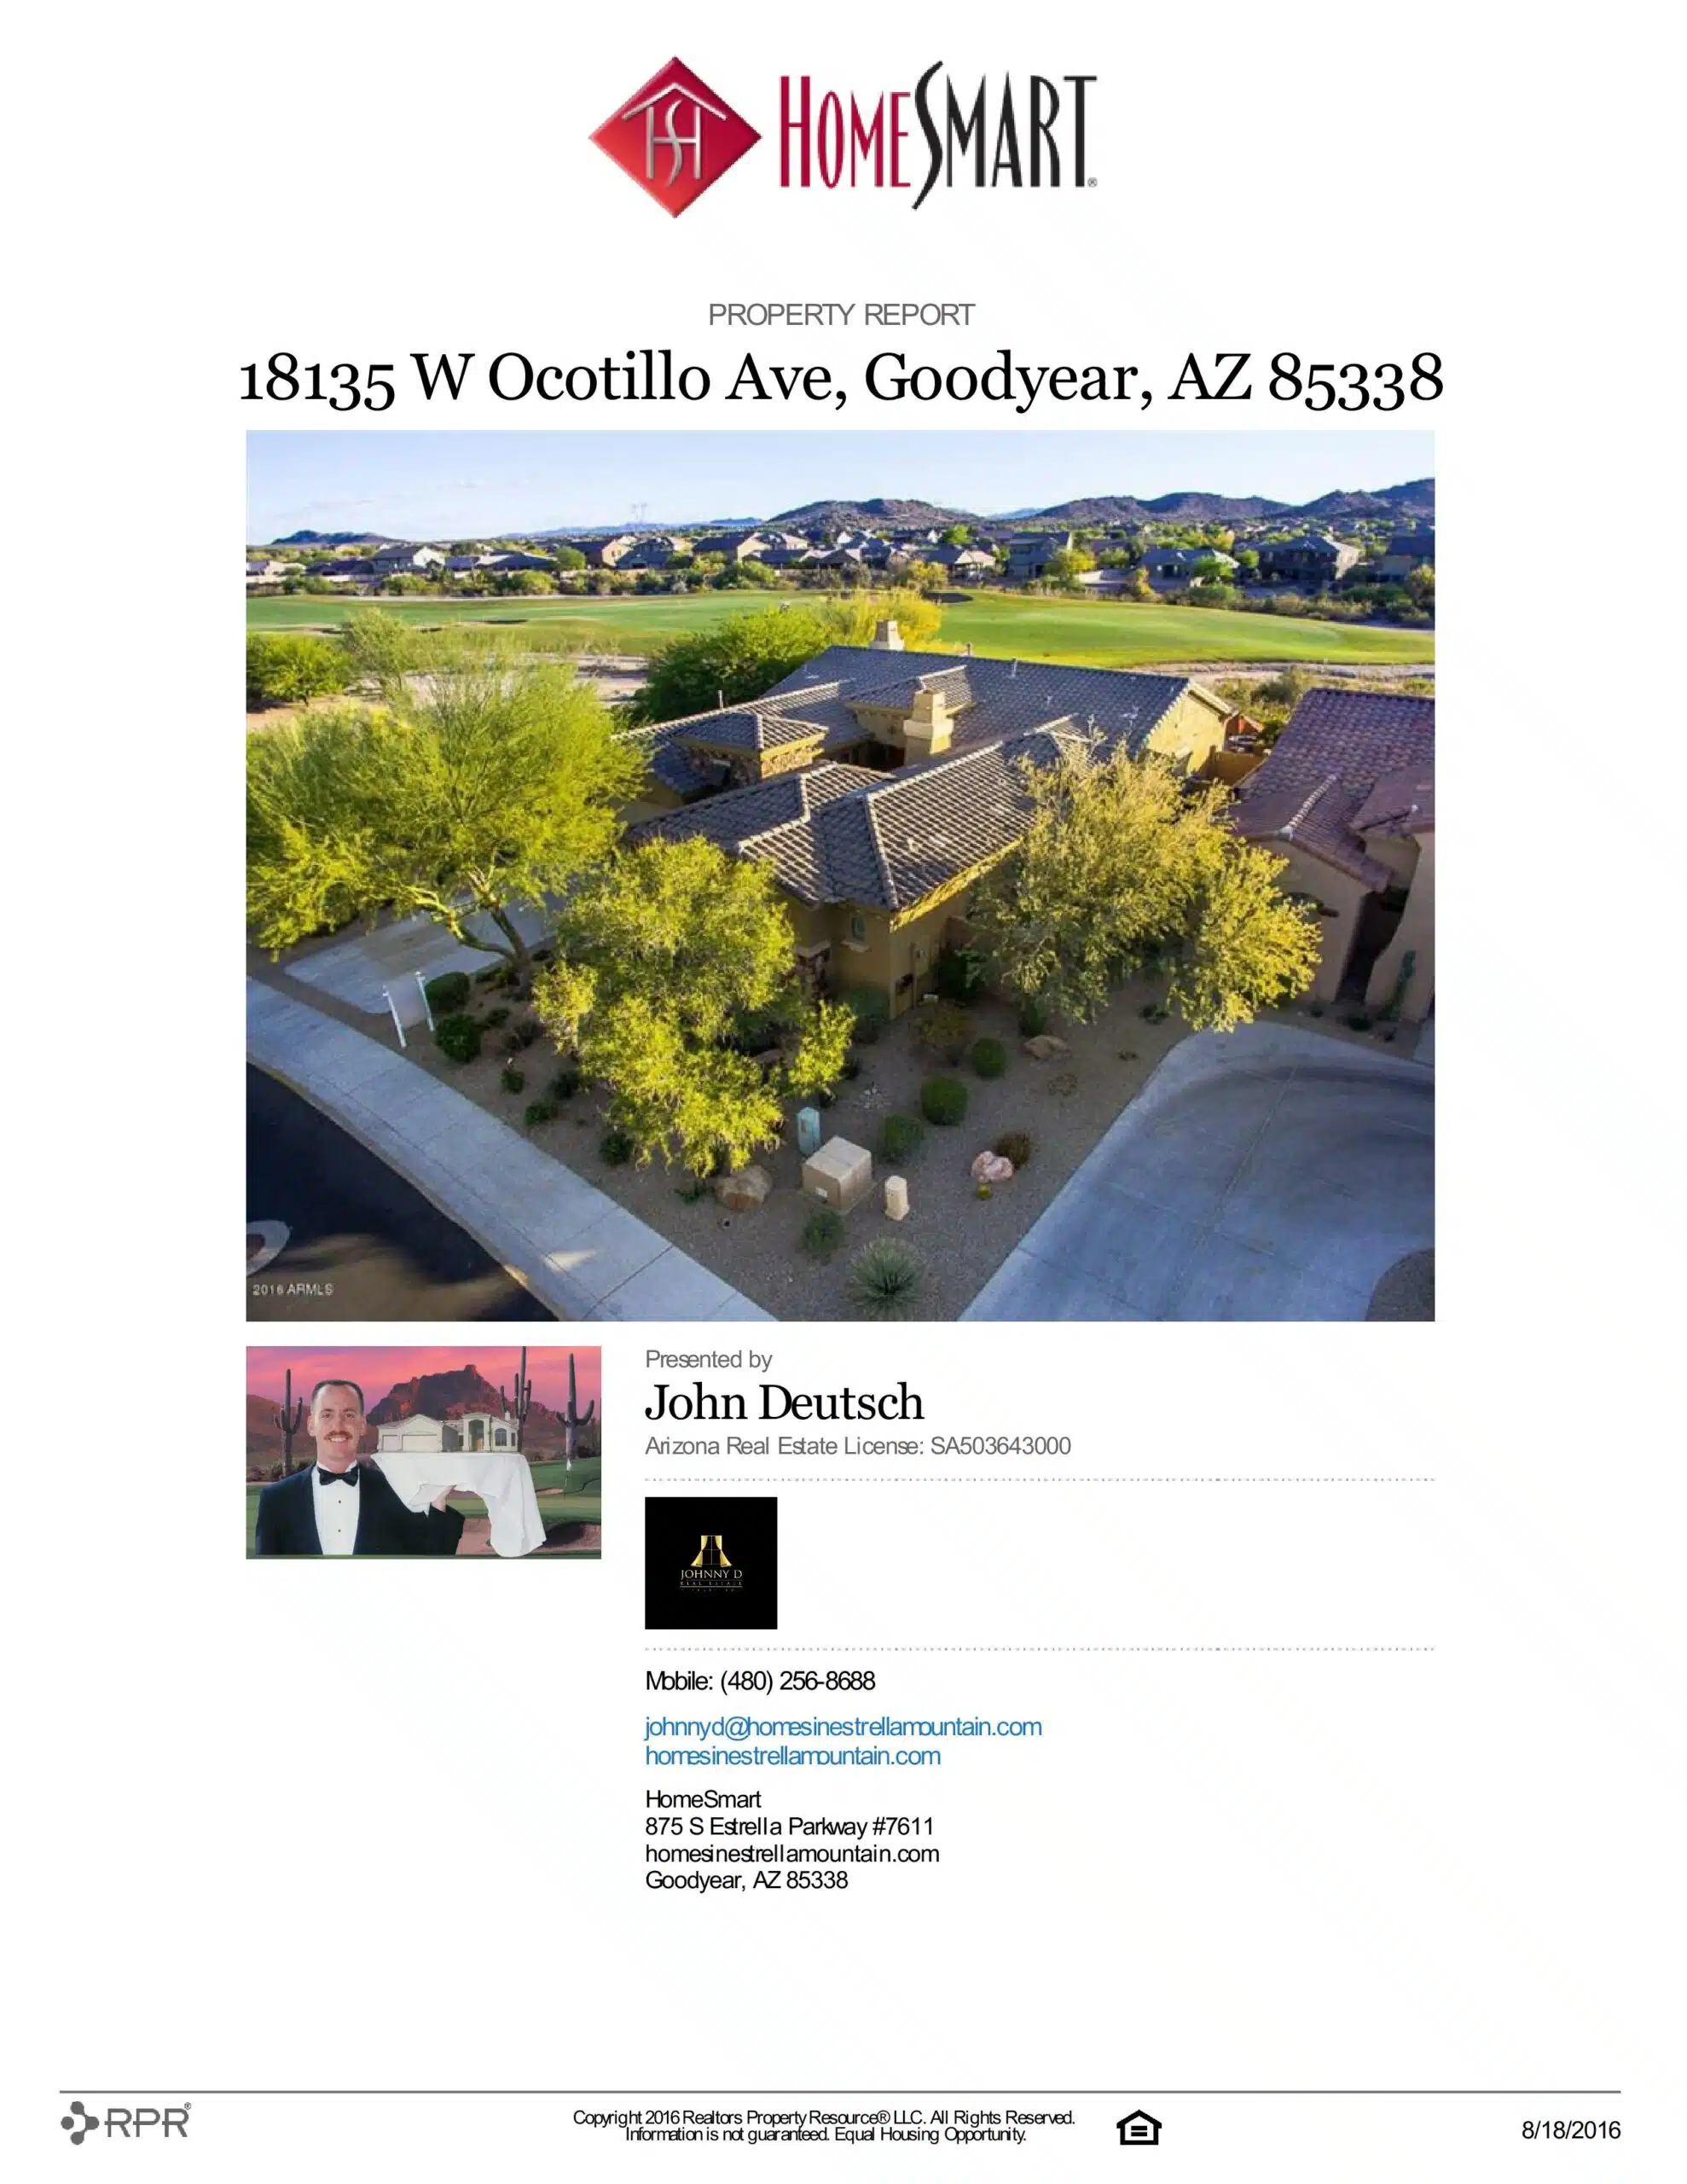 Property-Report_18135-W-Ocotillo-Ave-Goodyear-AZ-85338_2016-08-18-09-56-21-page-001